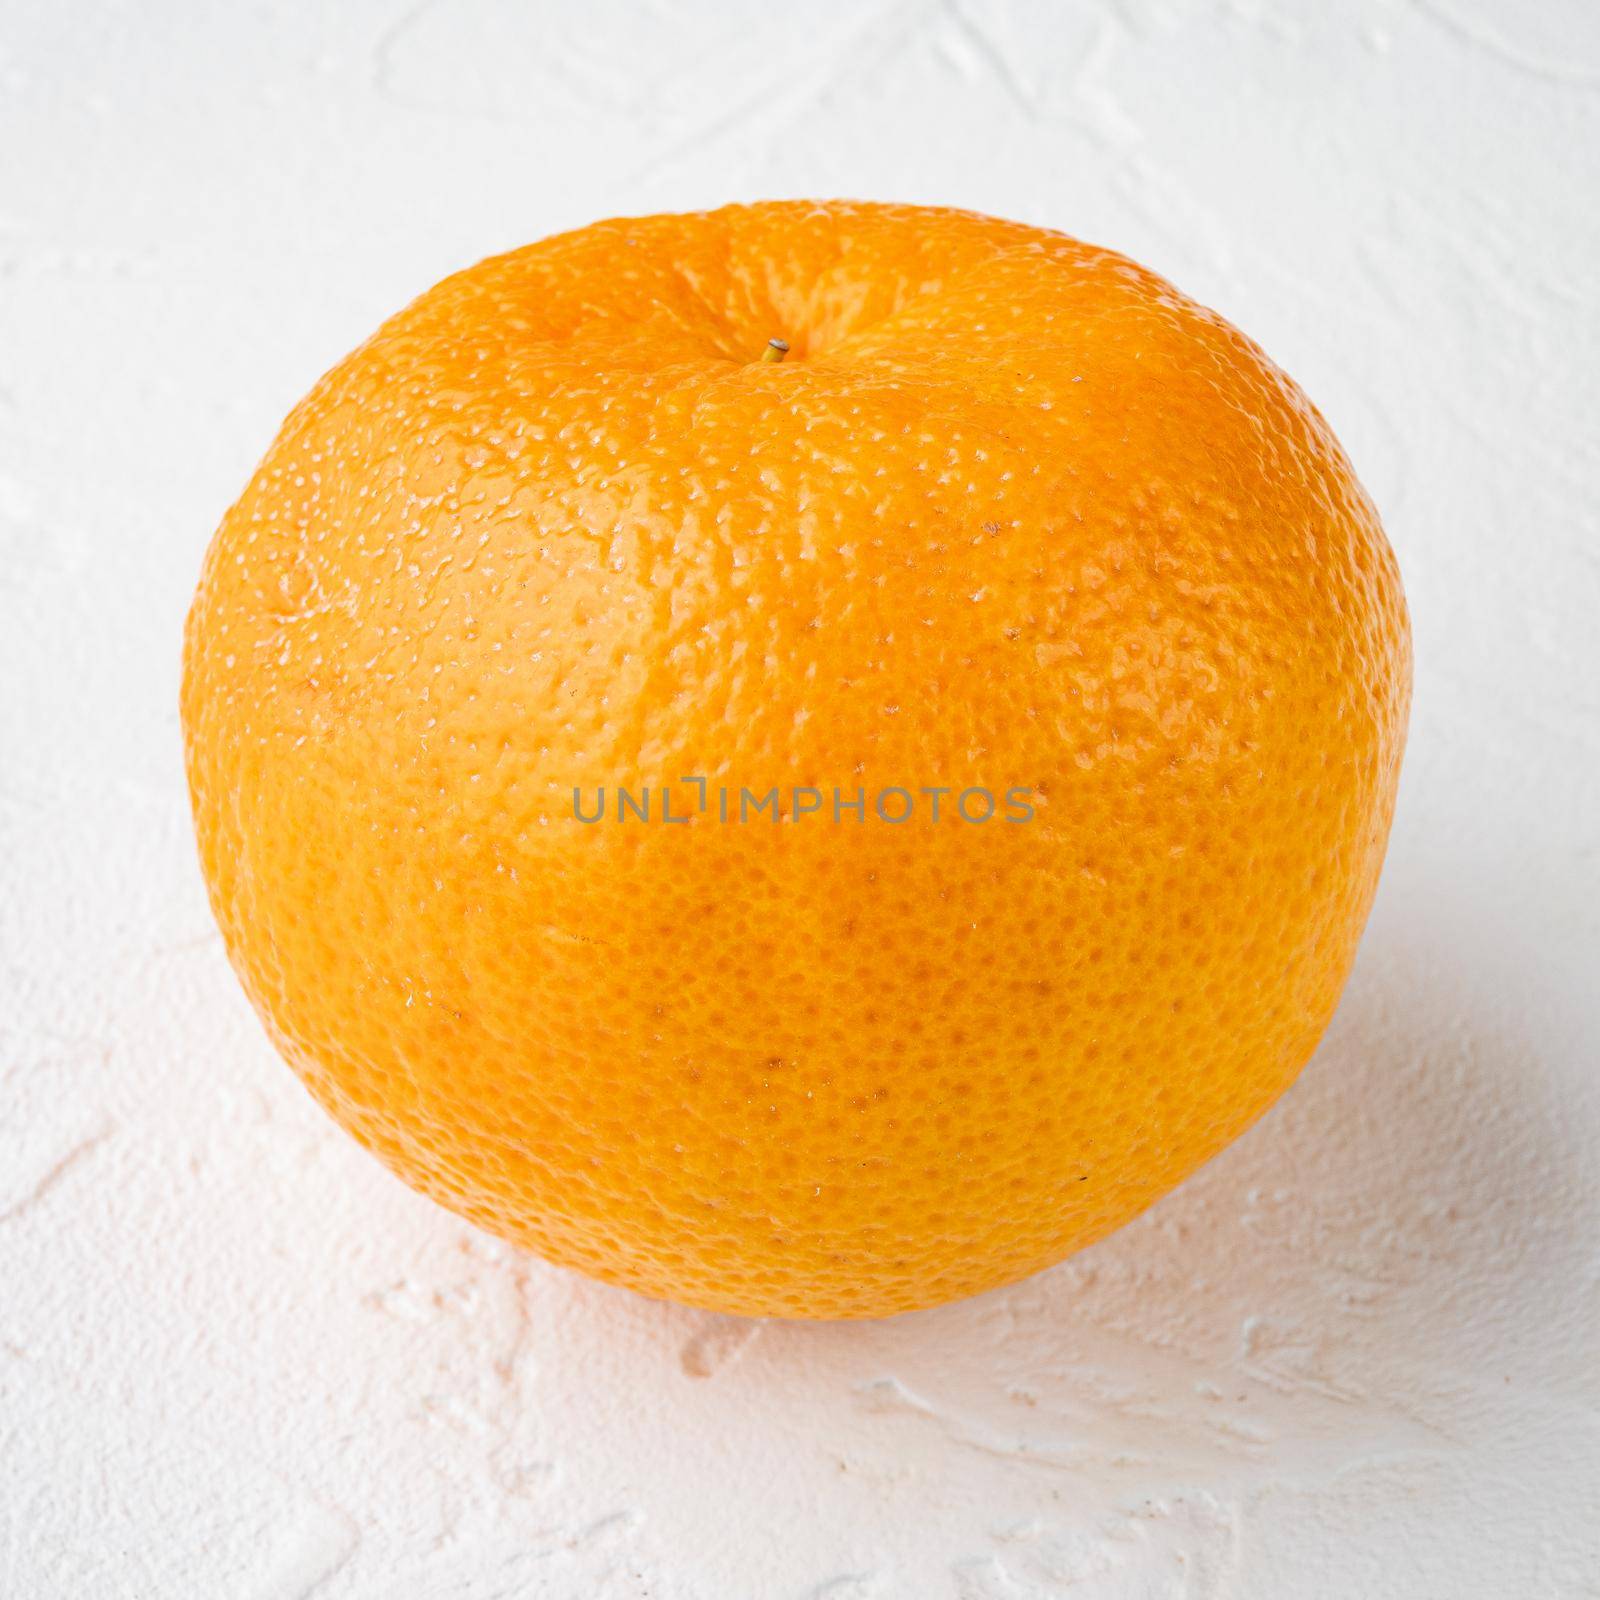 Tangerine whole, on white stone table background, square format by Ilianesolenyi